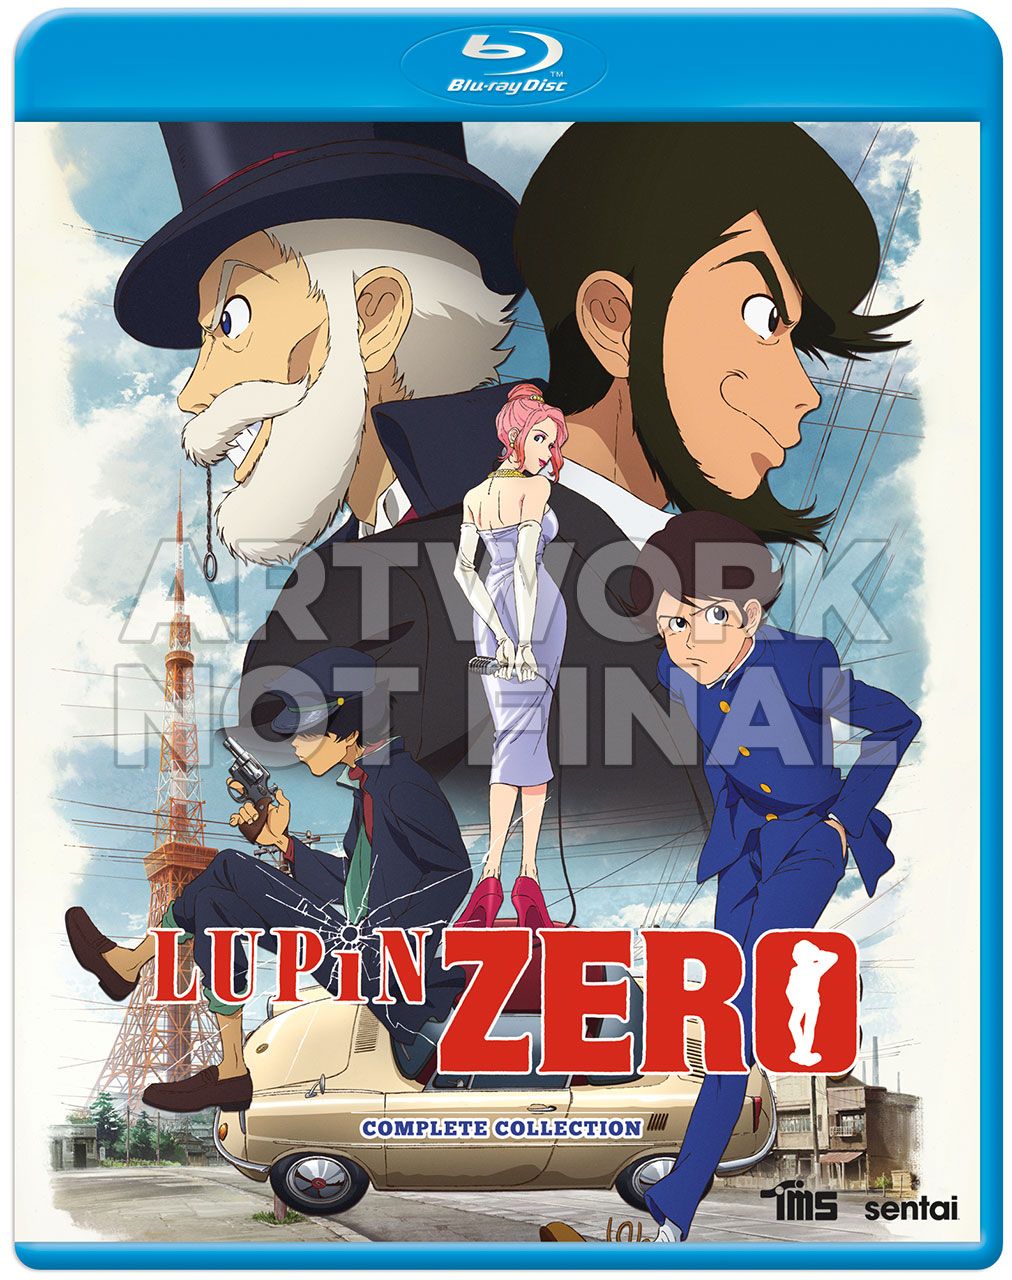 Lupin Zero: Complete Collection Blu-ray